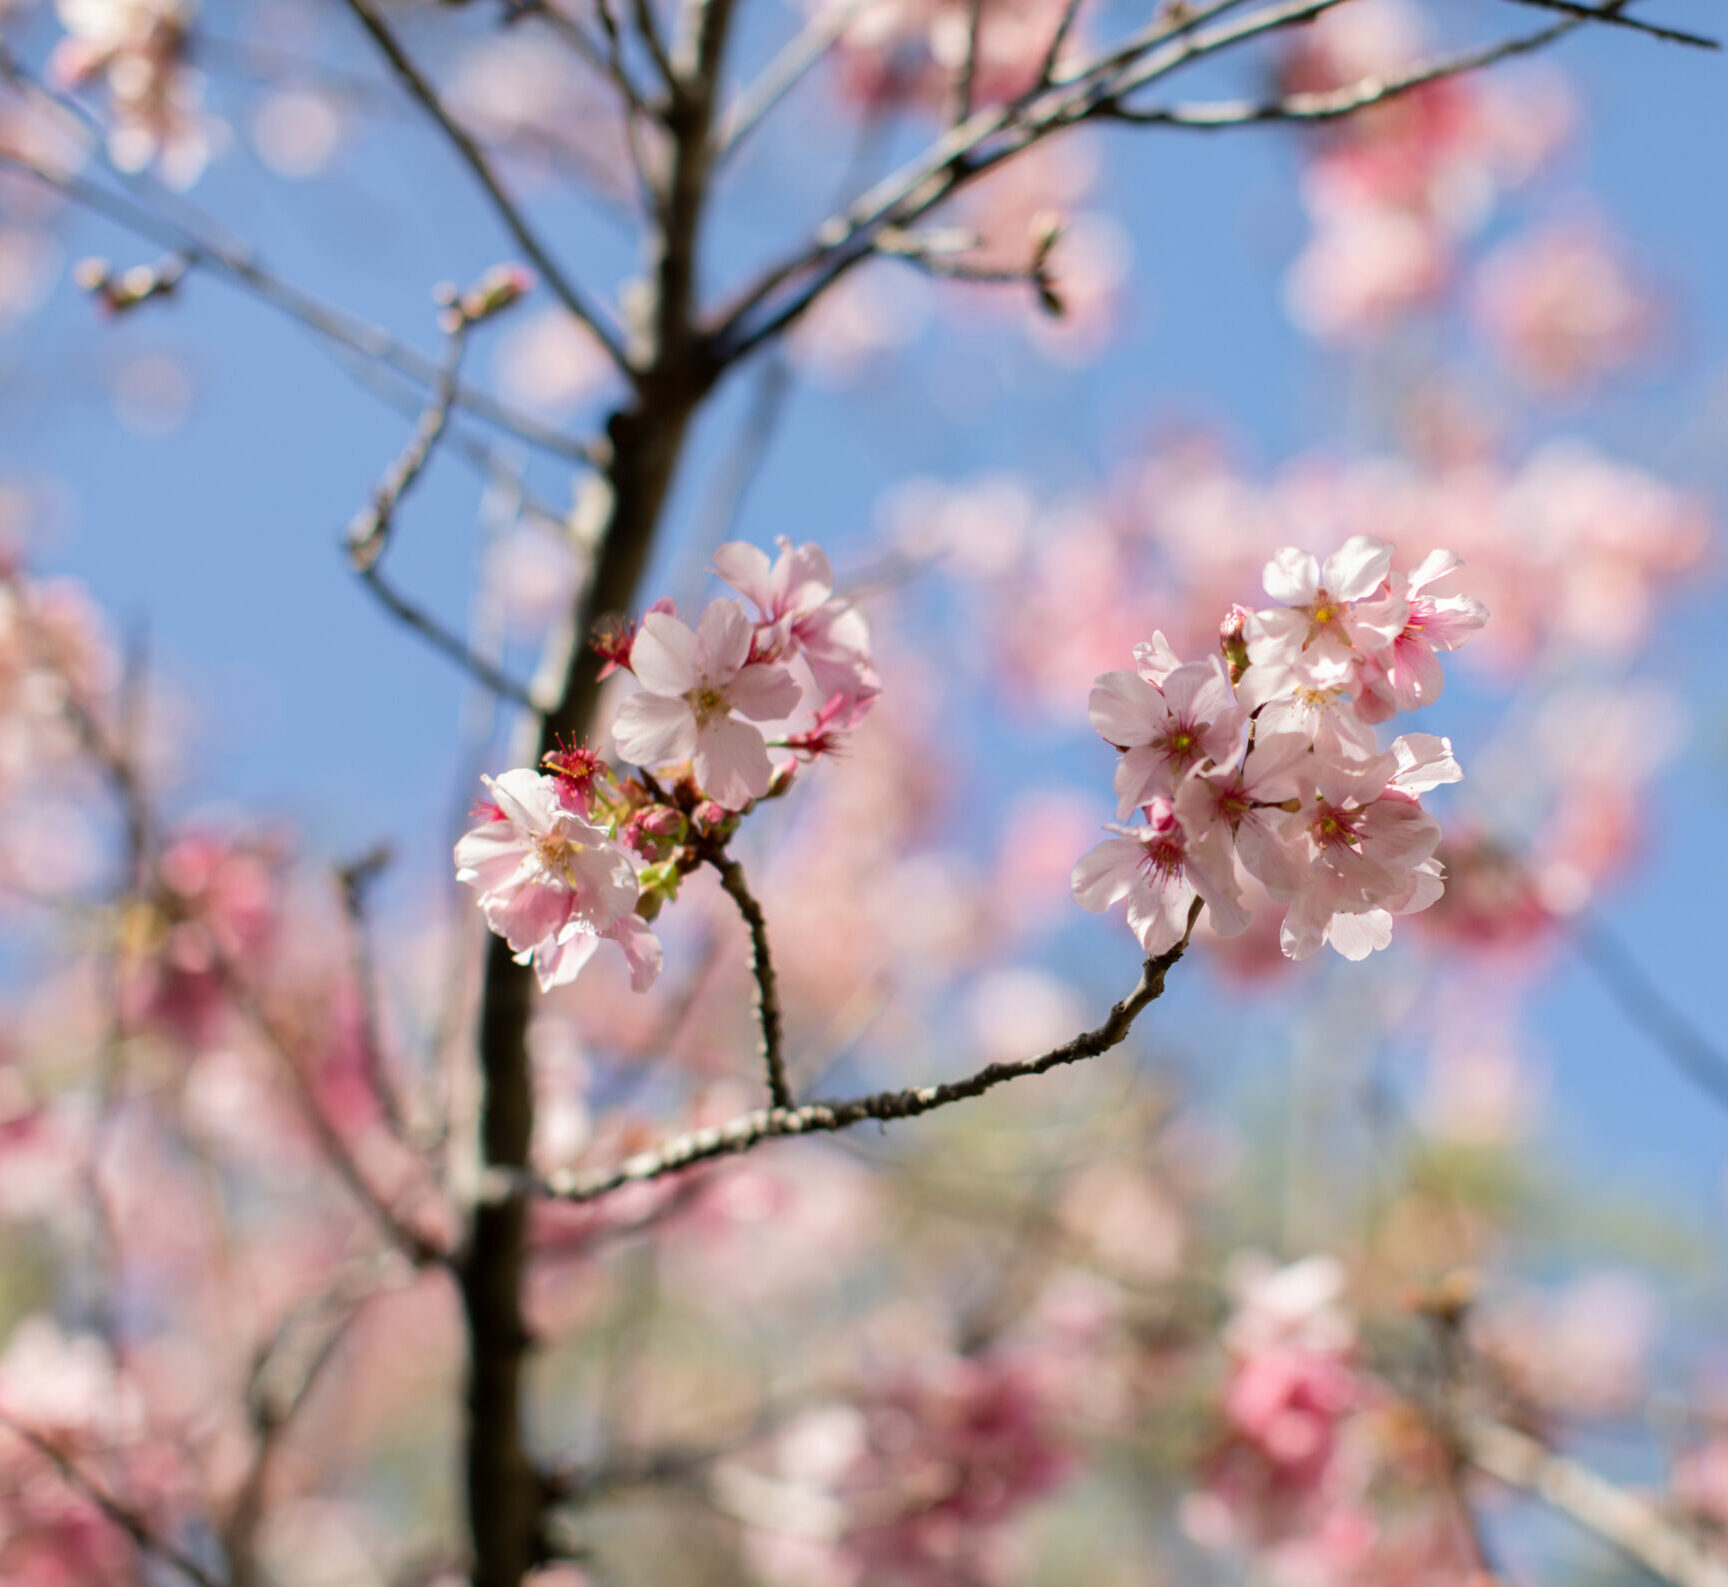 A close-up photograph of cherry blossoms on a branch in the Japanese Friendship Garden.